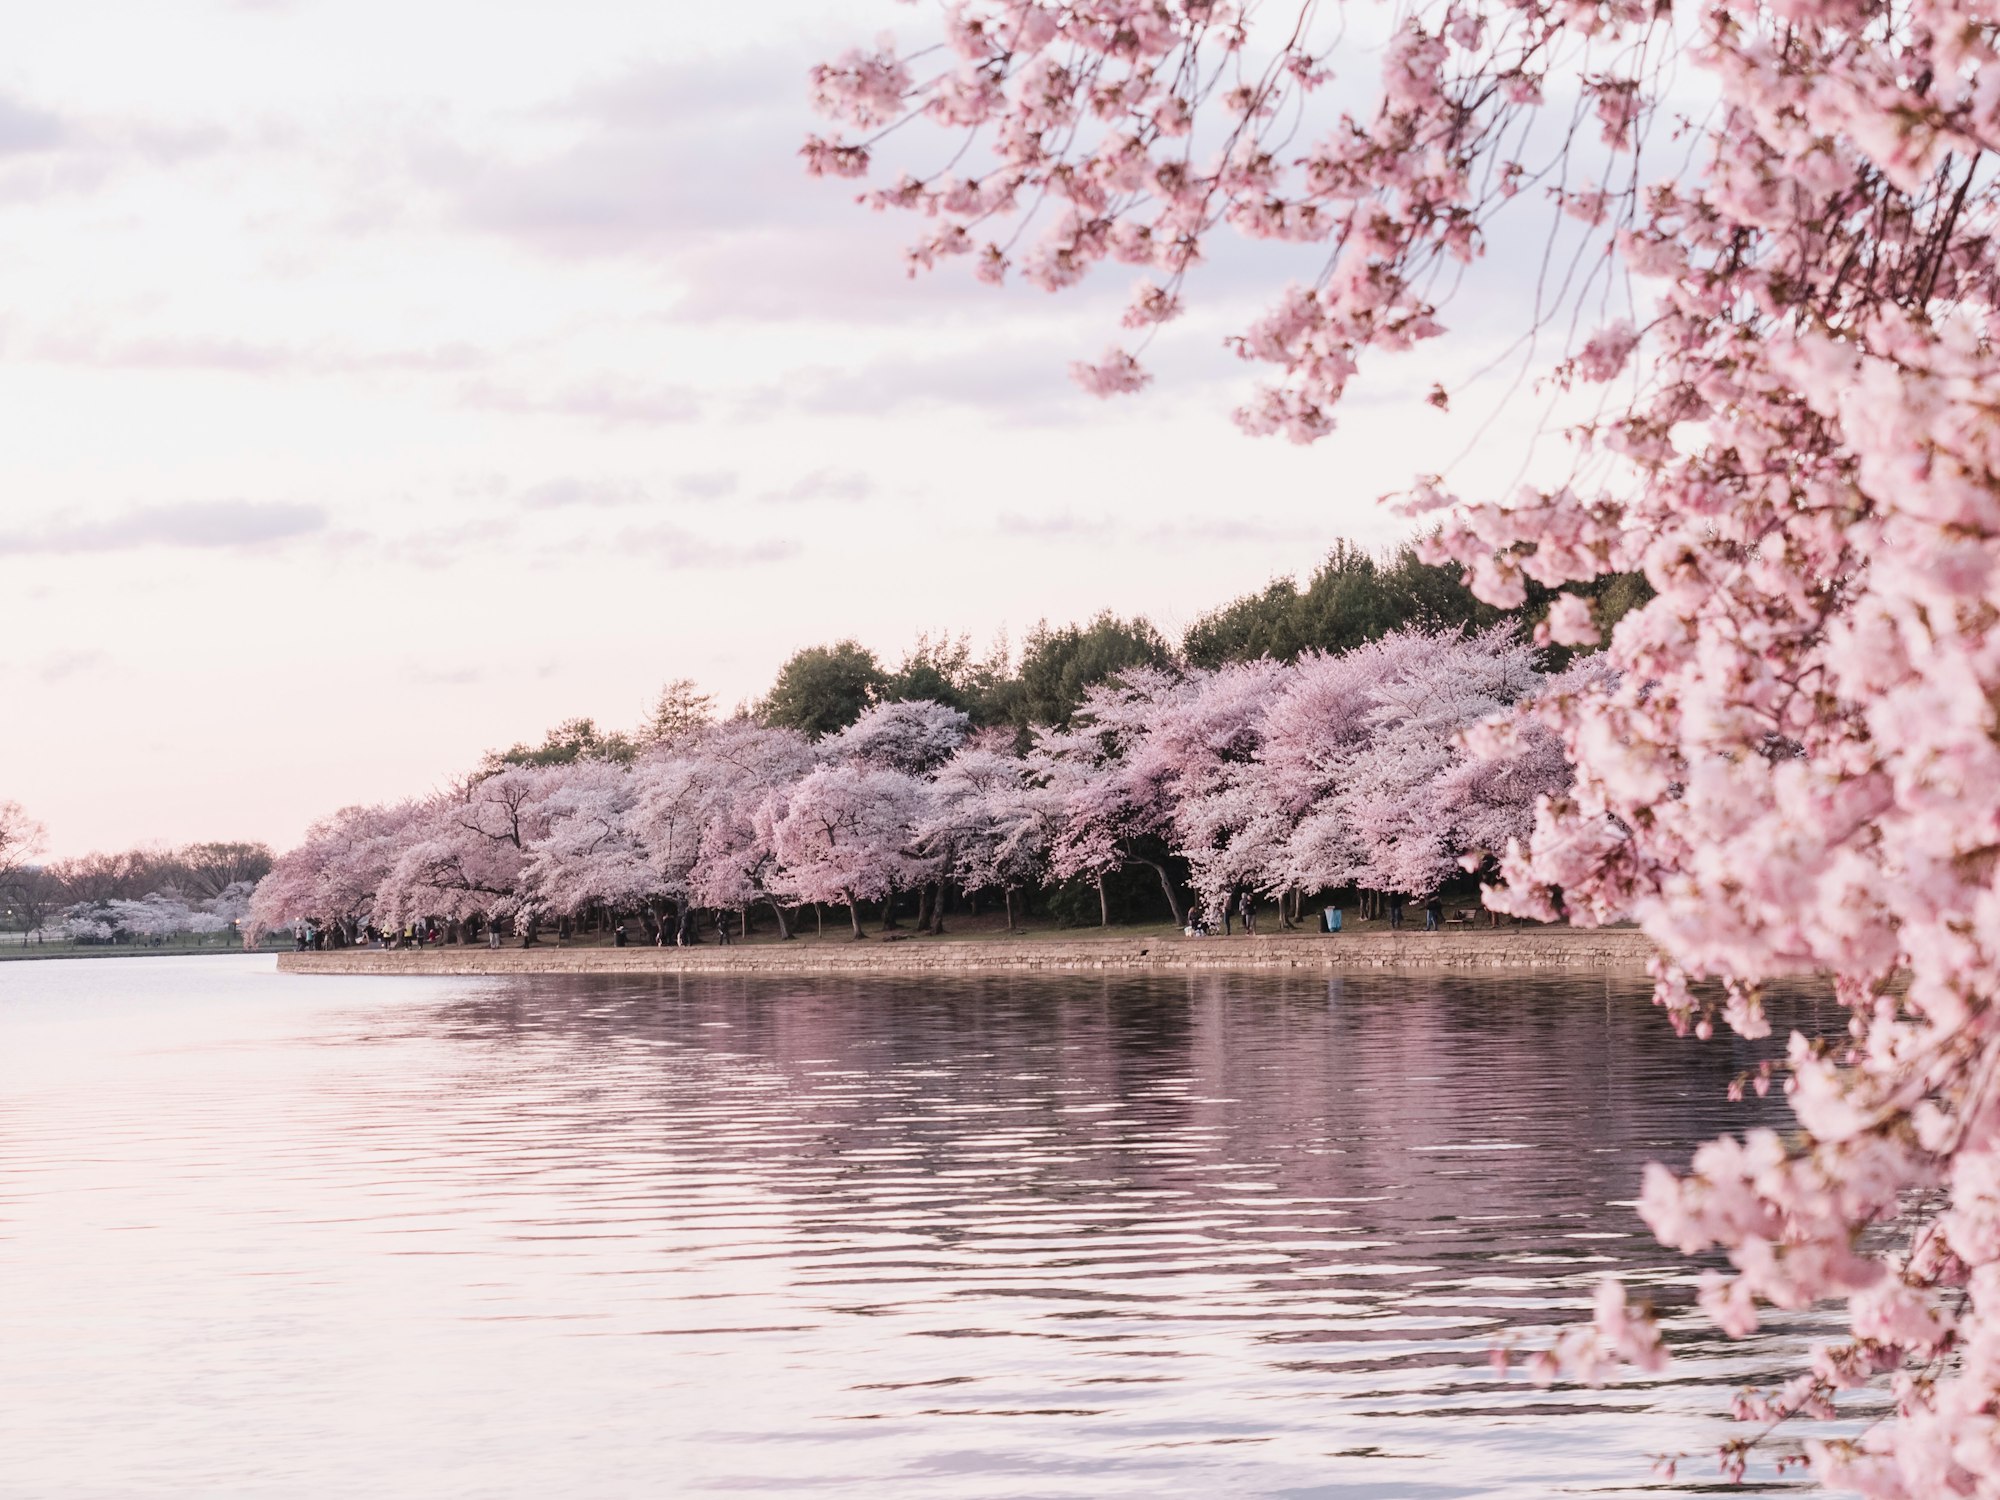 Cherry Blossom Viewing Spots Around the World